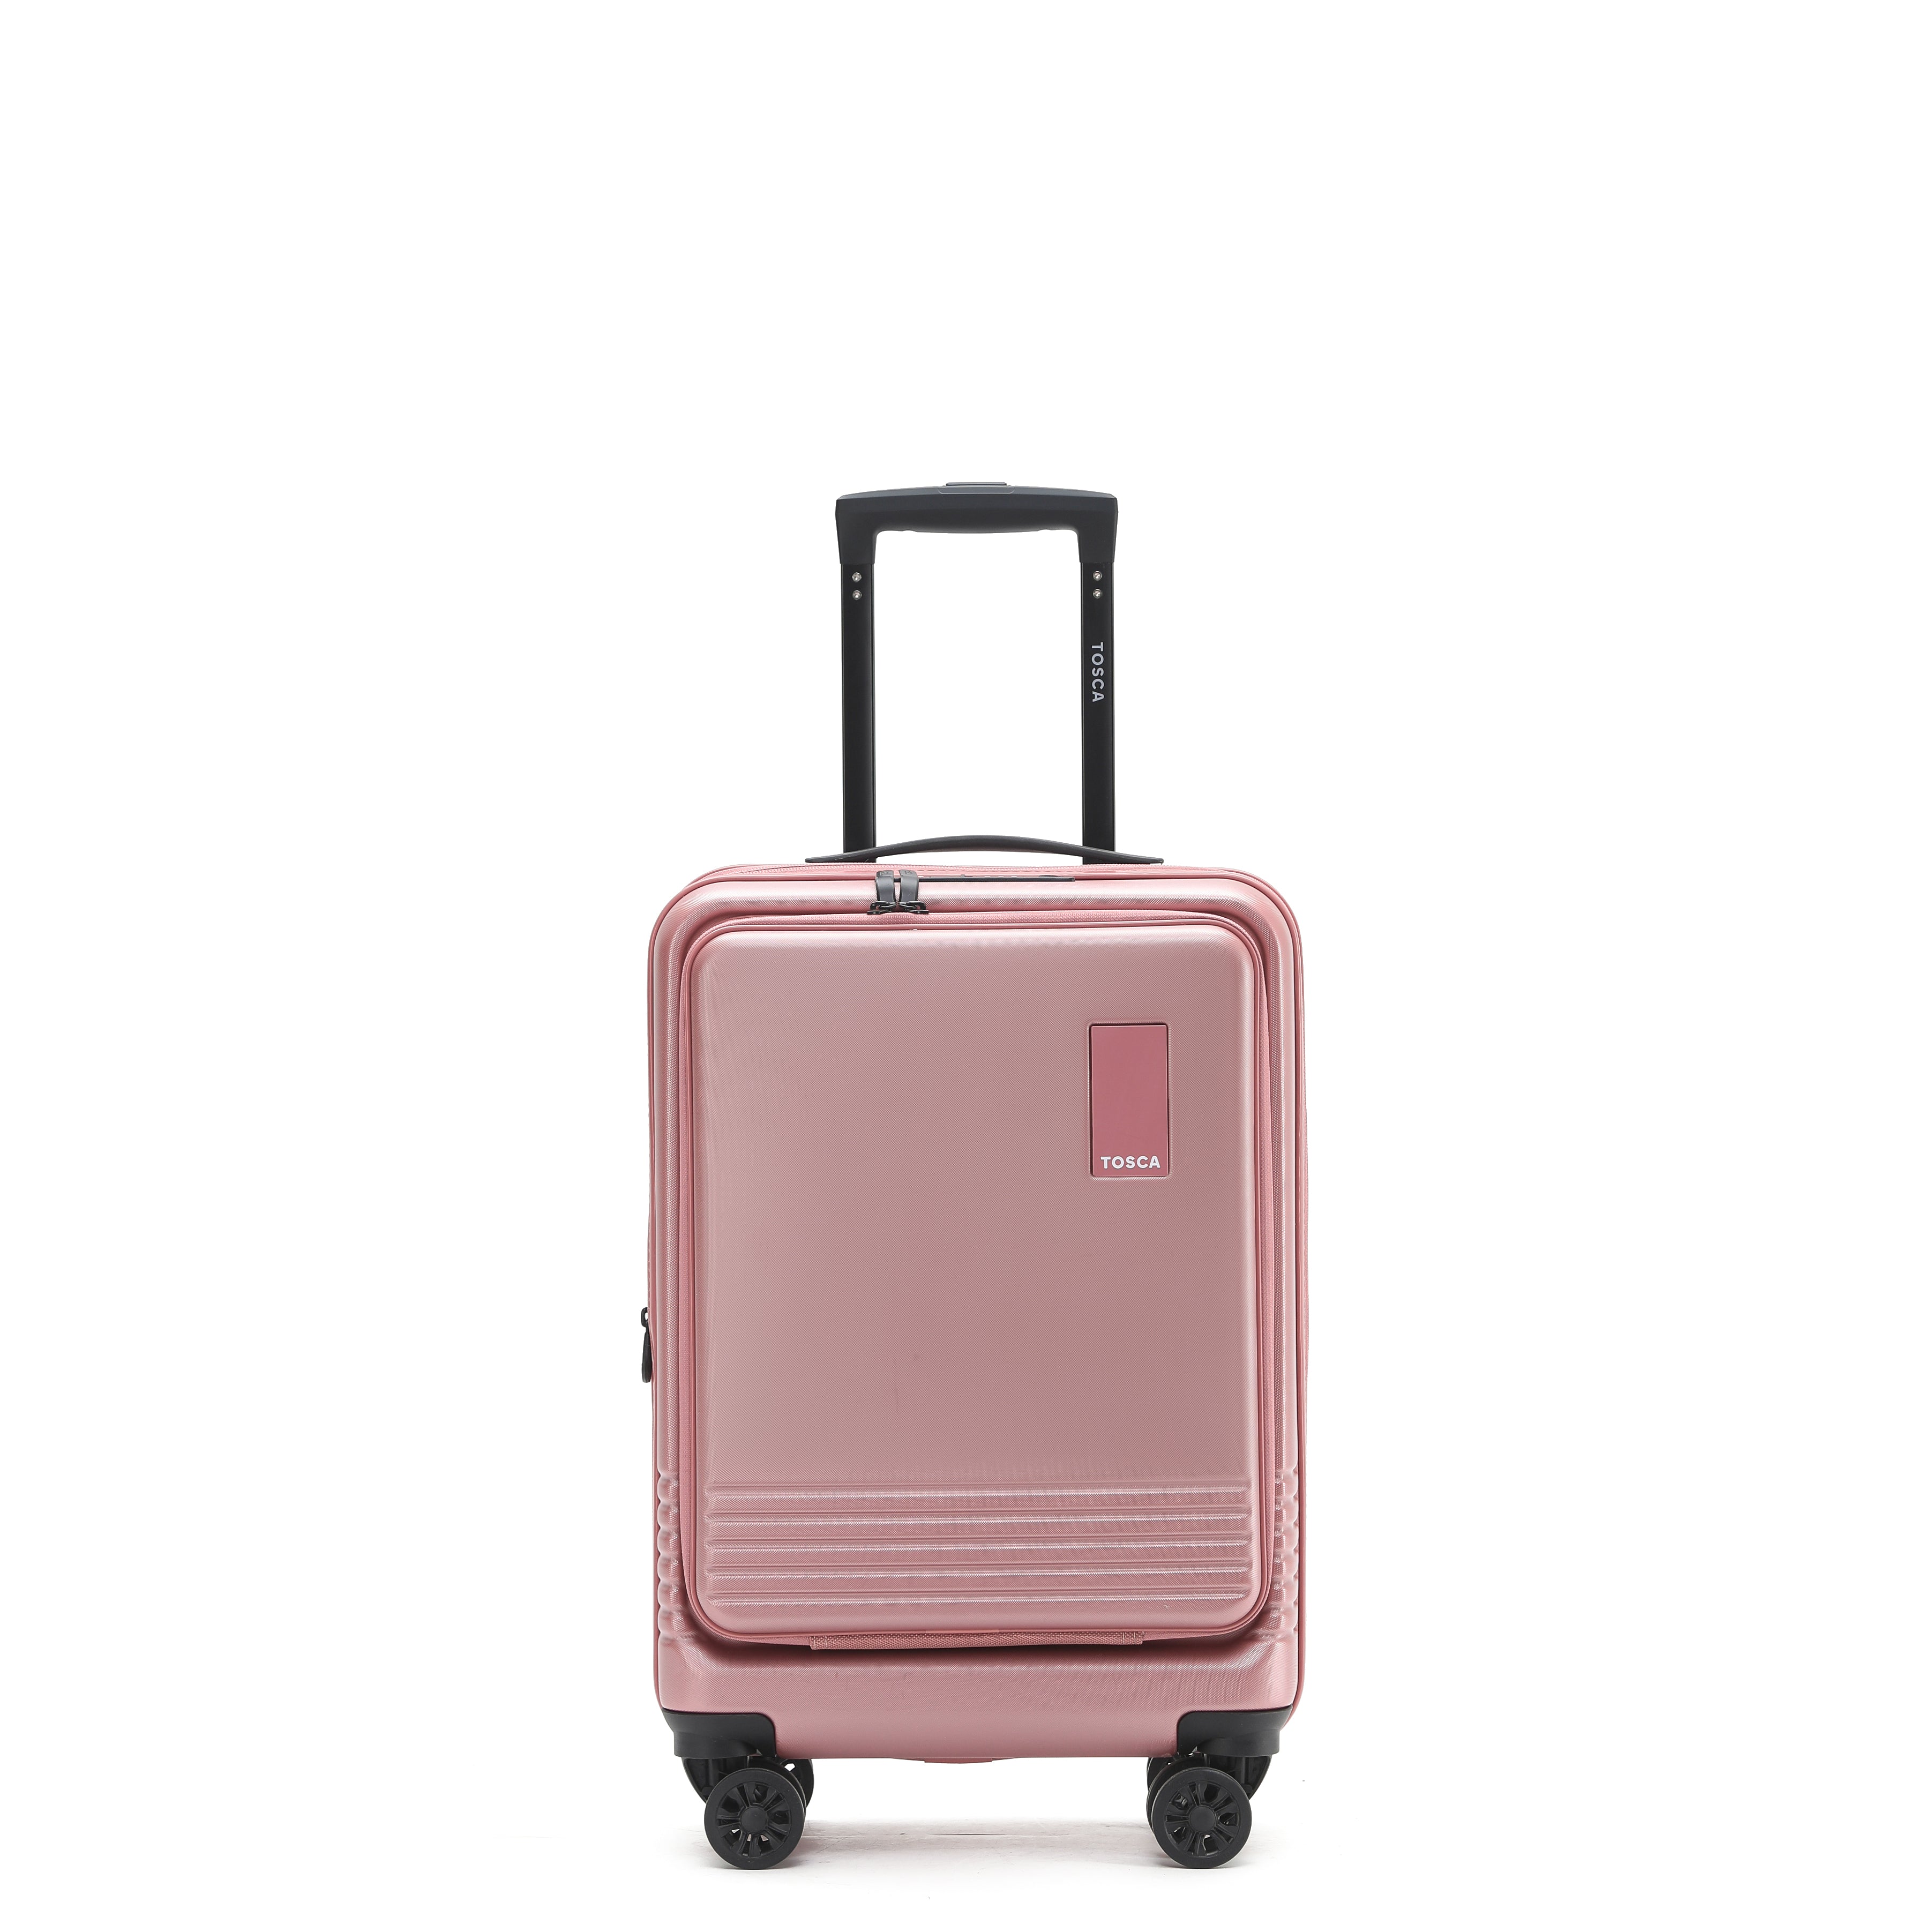 Tosca - TCA644 Horizon Front lid opening Set of 3 suitcases - Dusty Rose-6